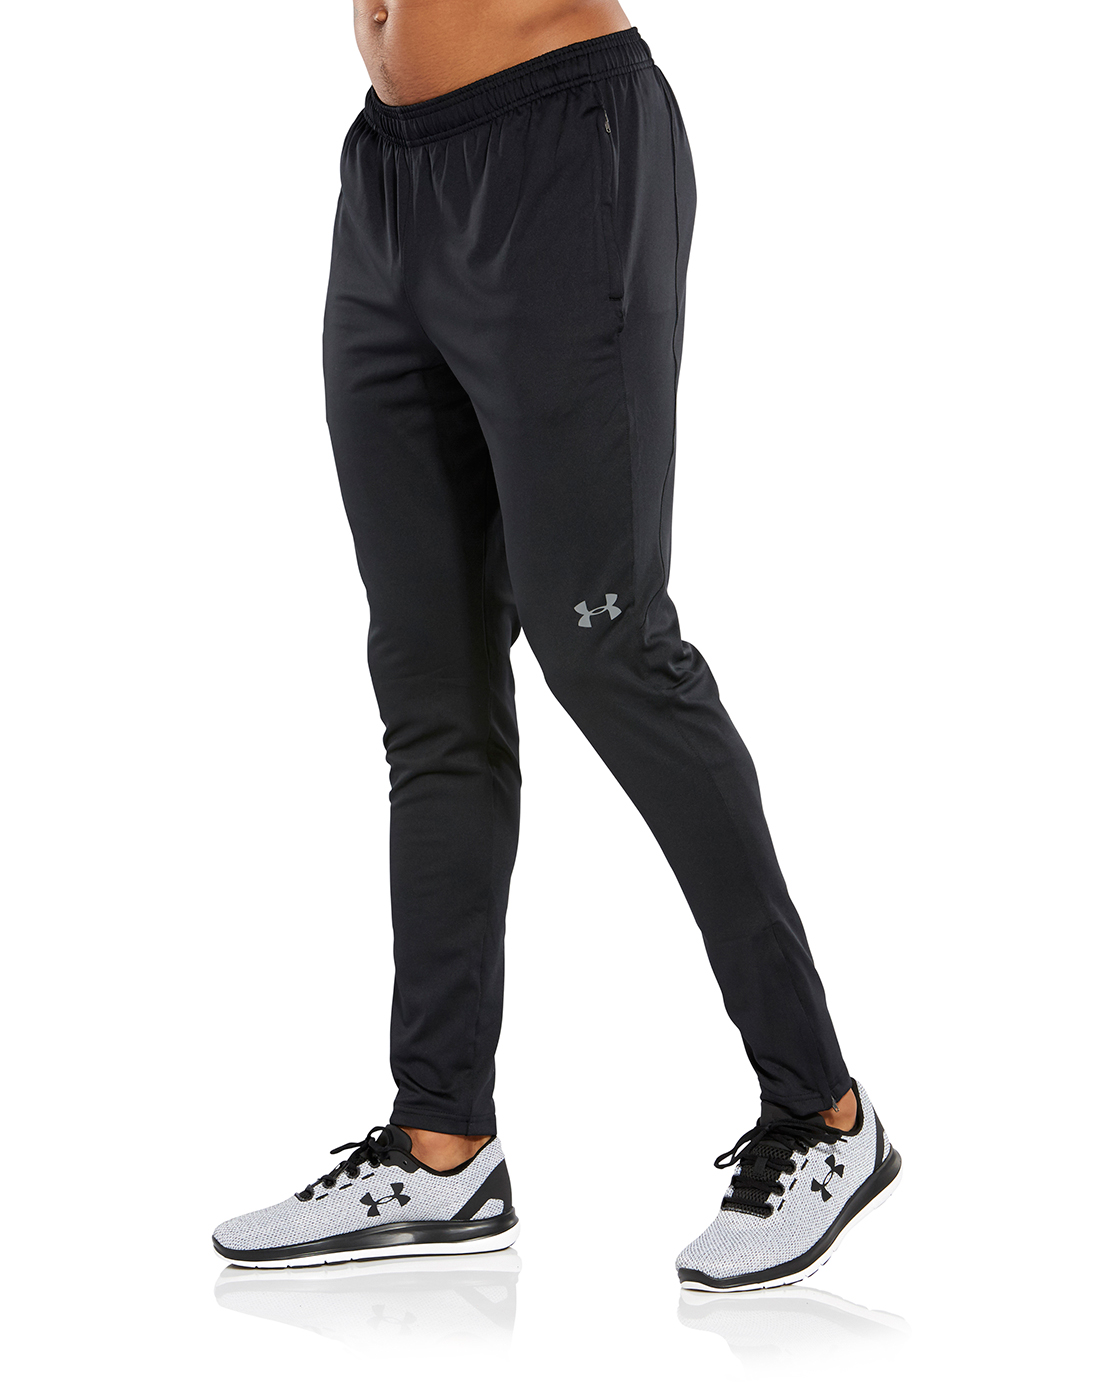 Under Armour Challenger Gym Pants 